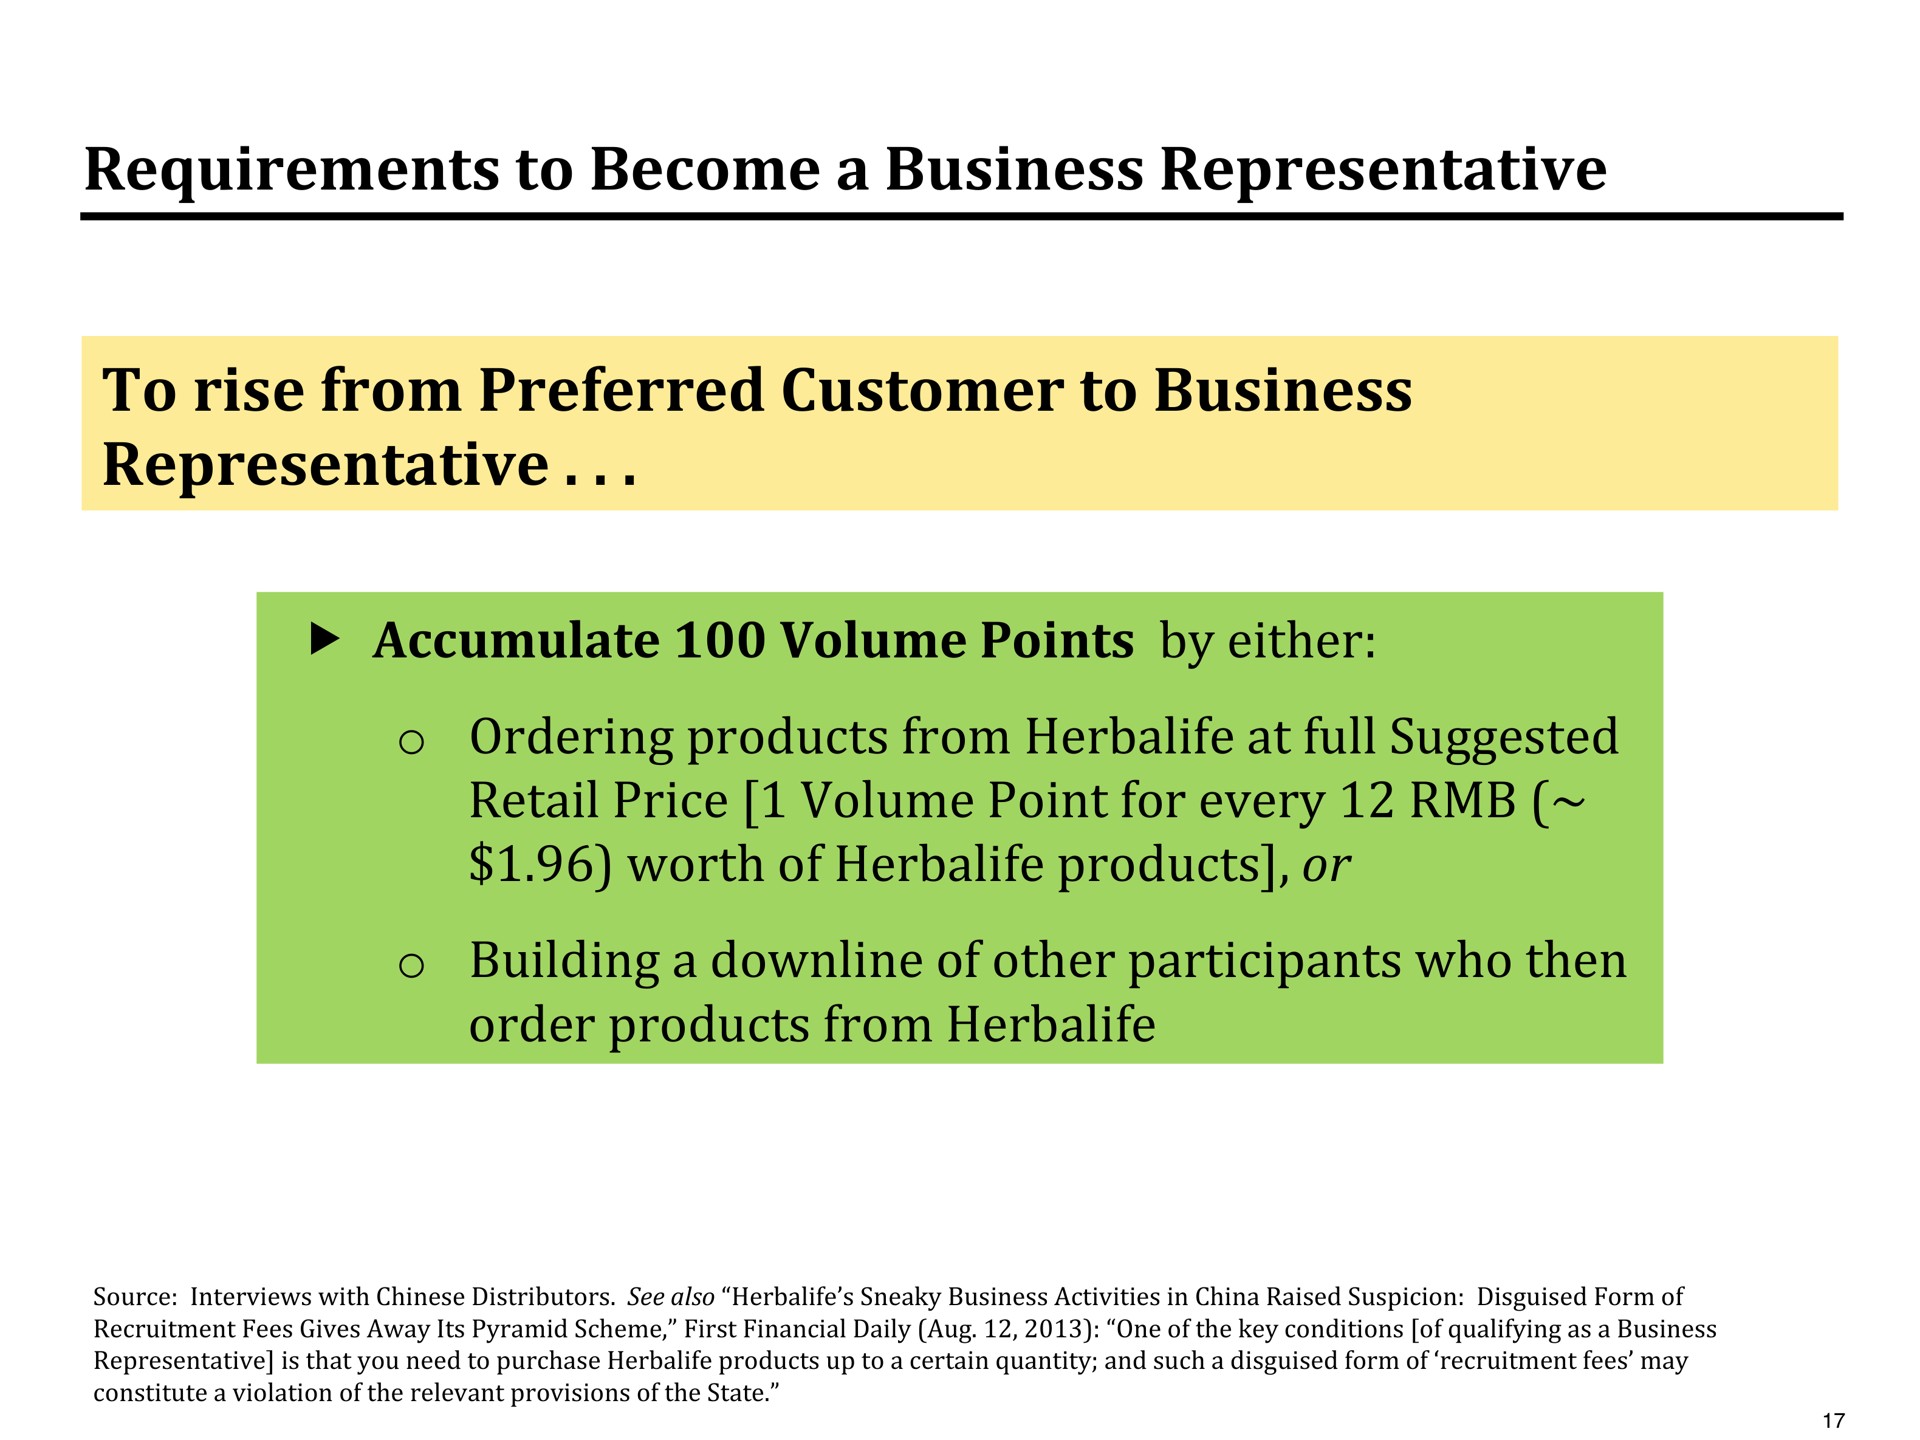 requirements to become a business representative to rise from preferred customer to business representative | Pershing Square